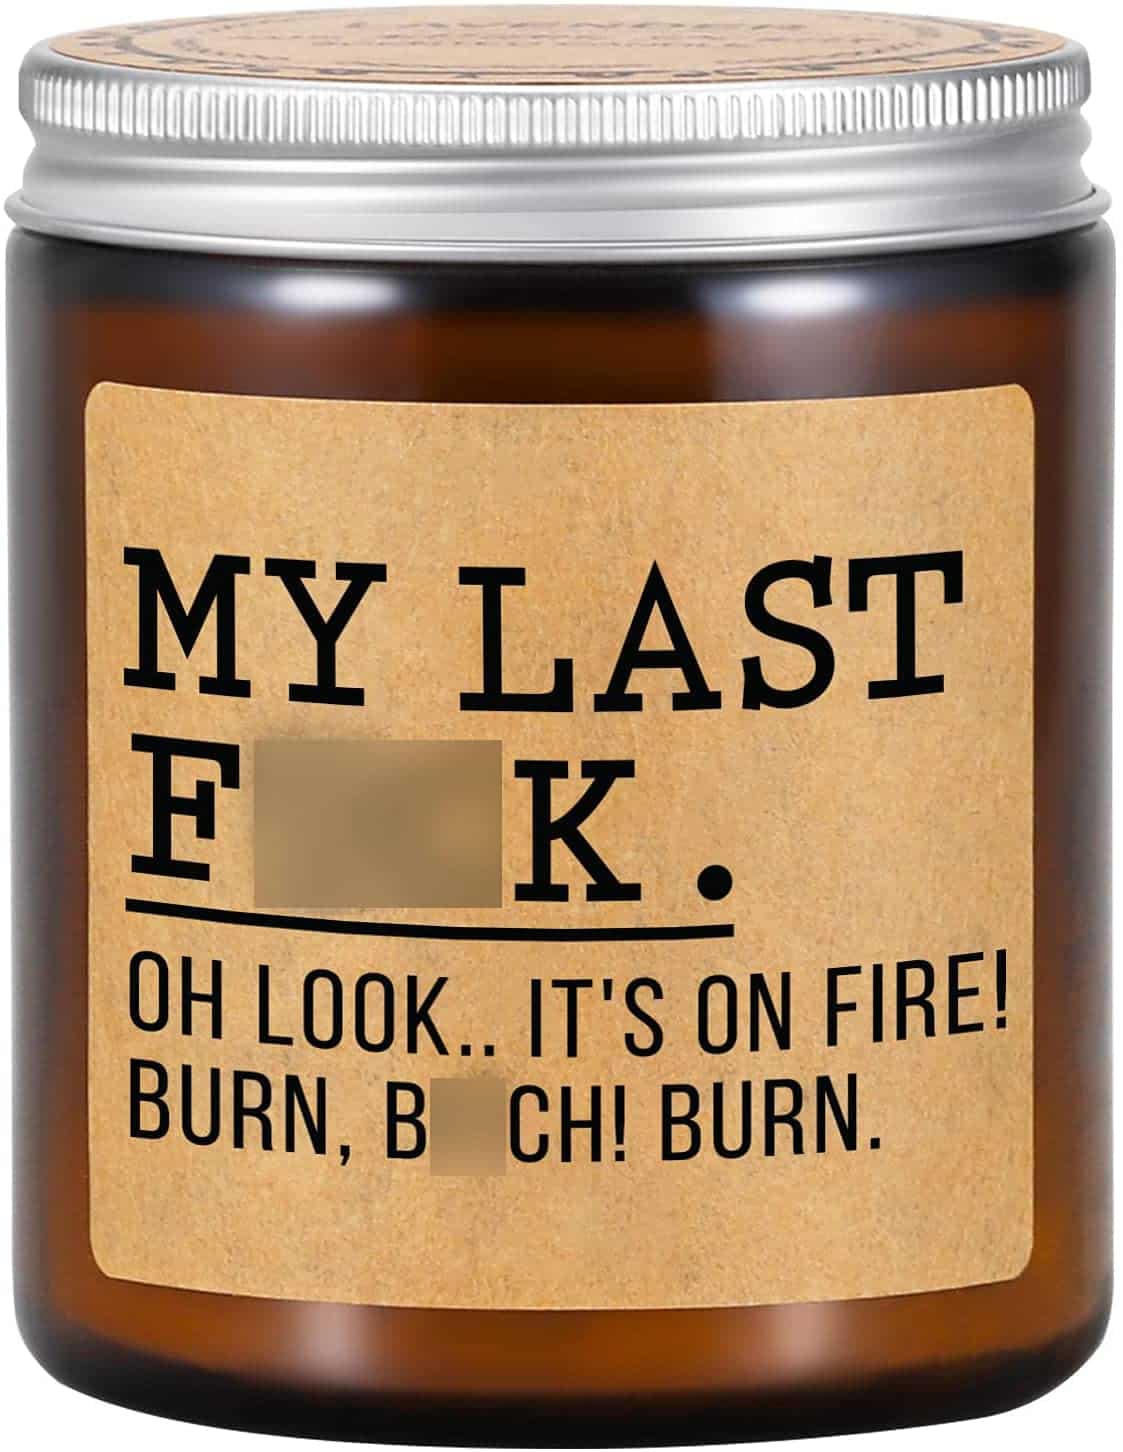 Last F Candle, Funny Christmas Gift 